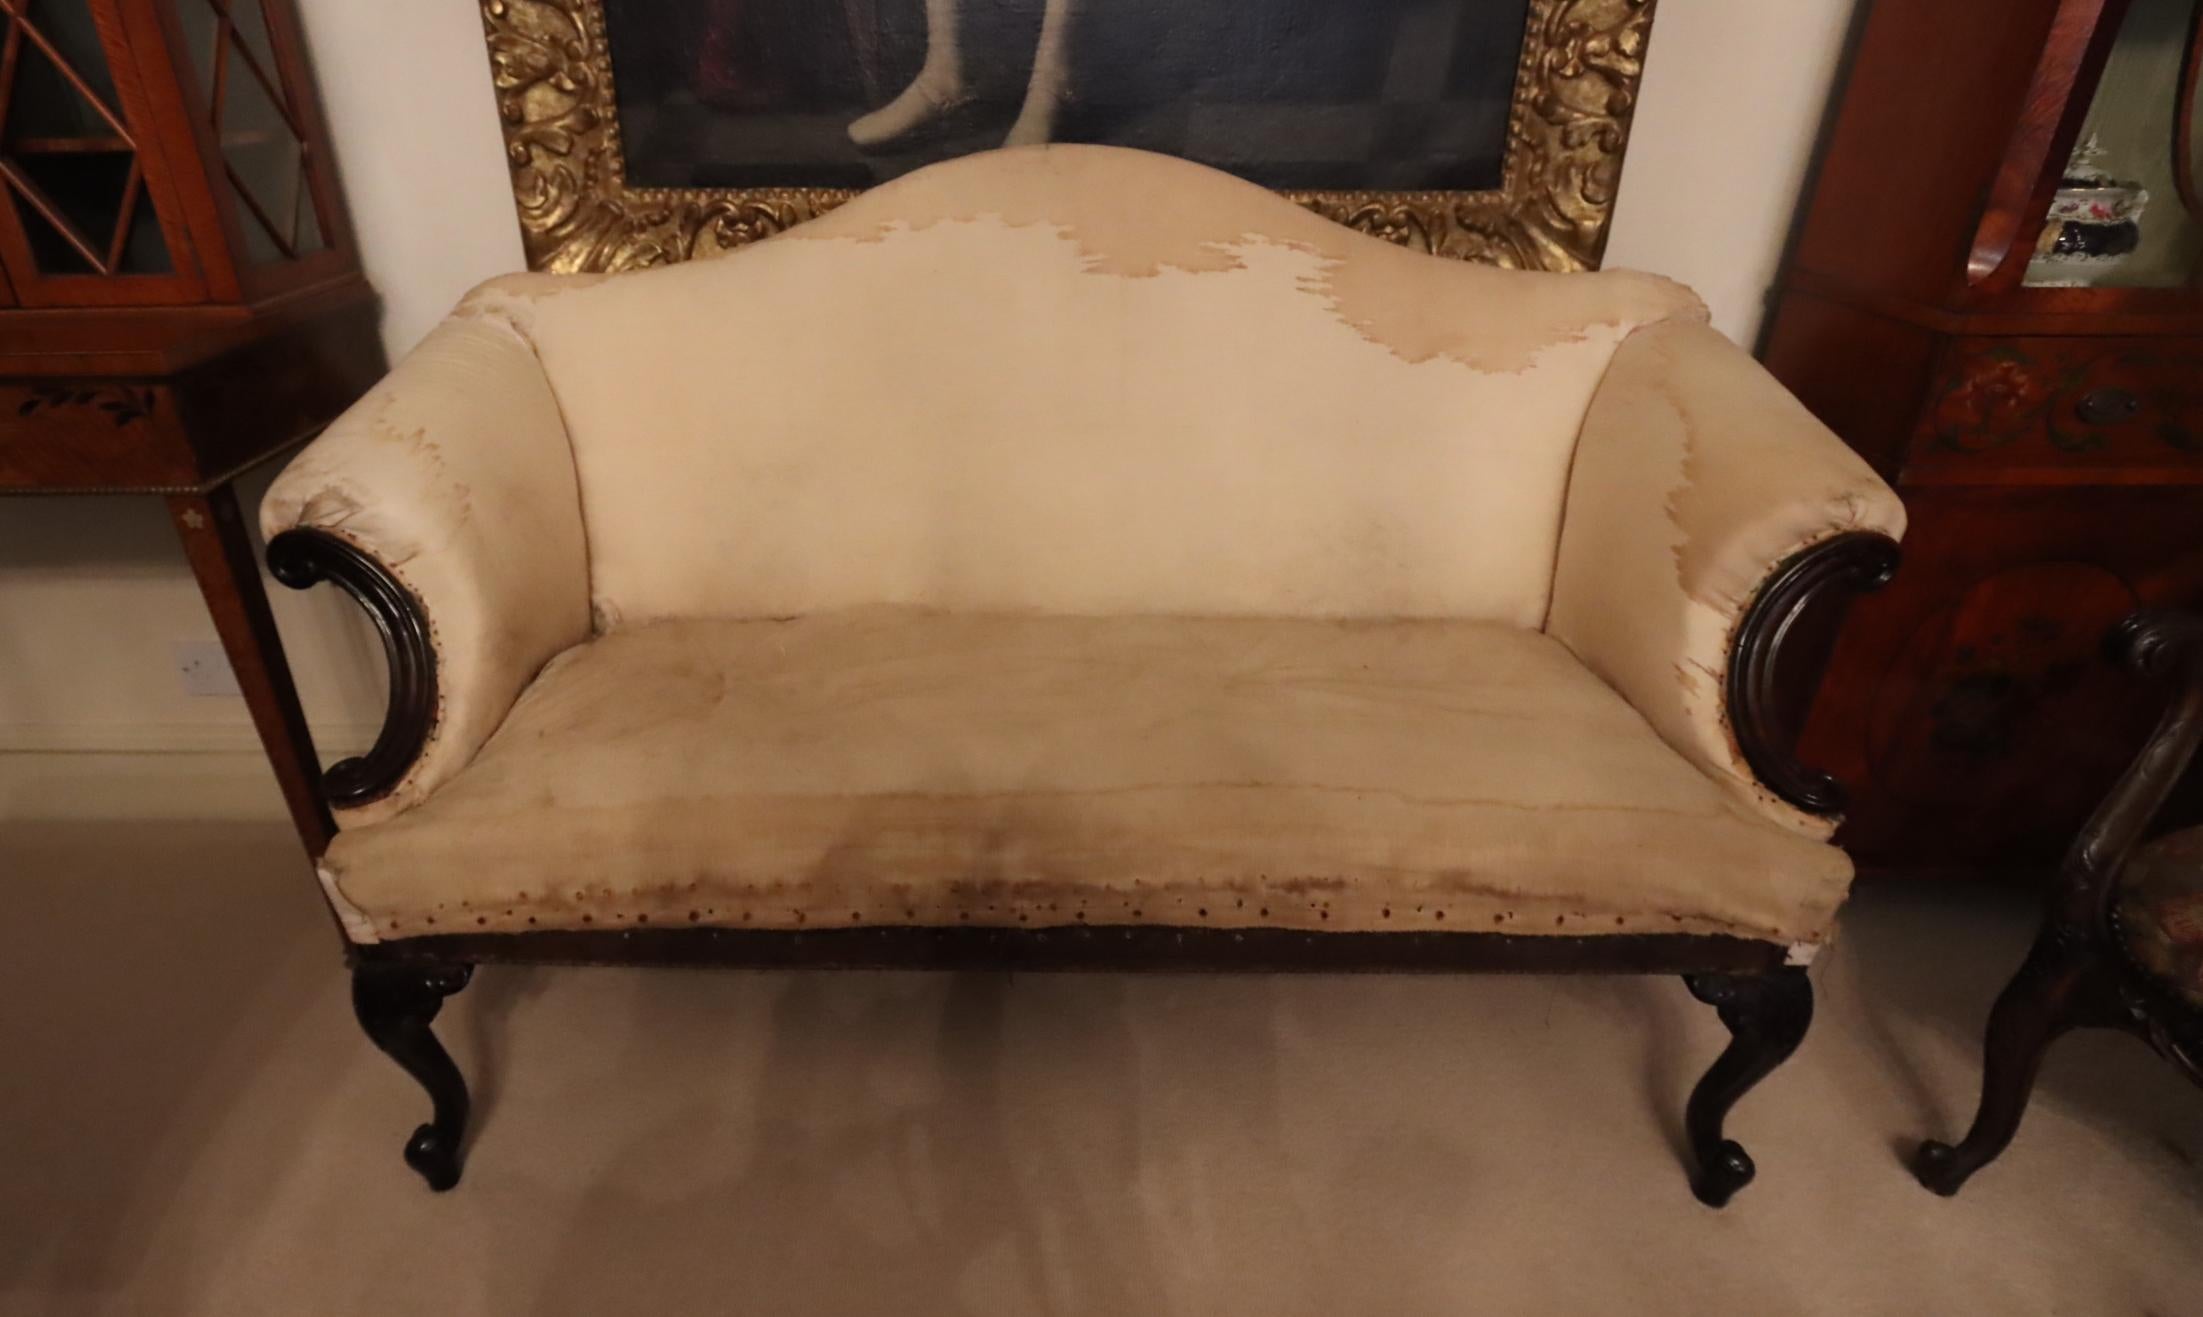 Behold this extraordinary Chippendale Camelback Sofa, a true masterpiece of timeless elegance! Adorned with breathtaking claw and ball feet, this opulent sofa hails from the illustrious era of 1770, resonating with centuries of history and grandeur.